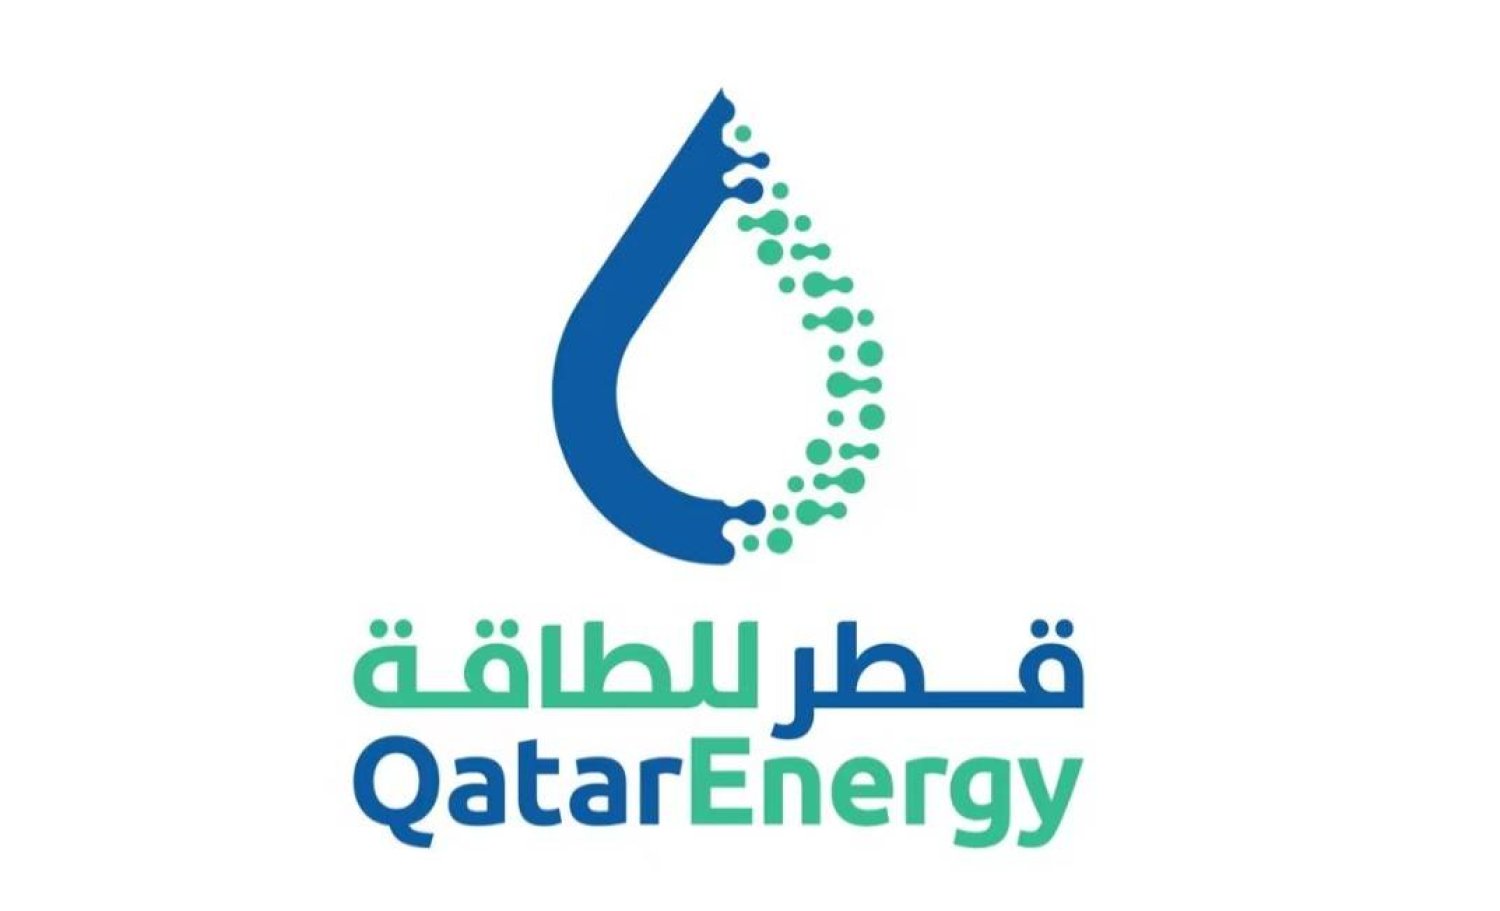 The new Qatar Energy logo is pictured during a news conference in Doha, Qatar, October 11, 2021. Qatar News Agency/Handout via REUTERS/File Photo